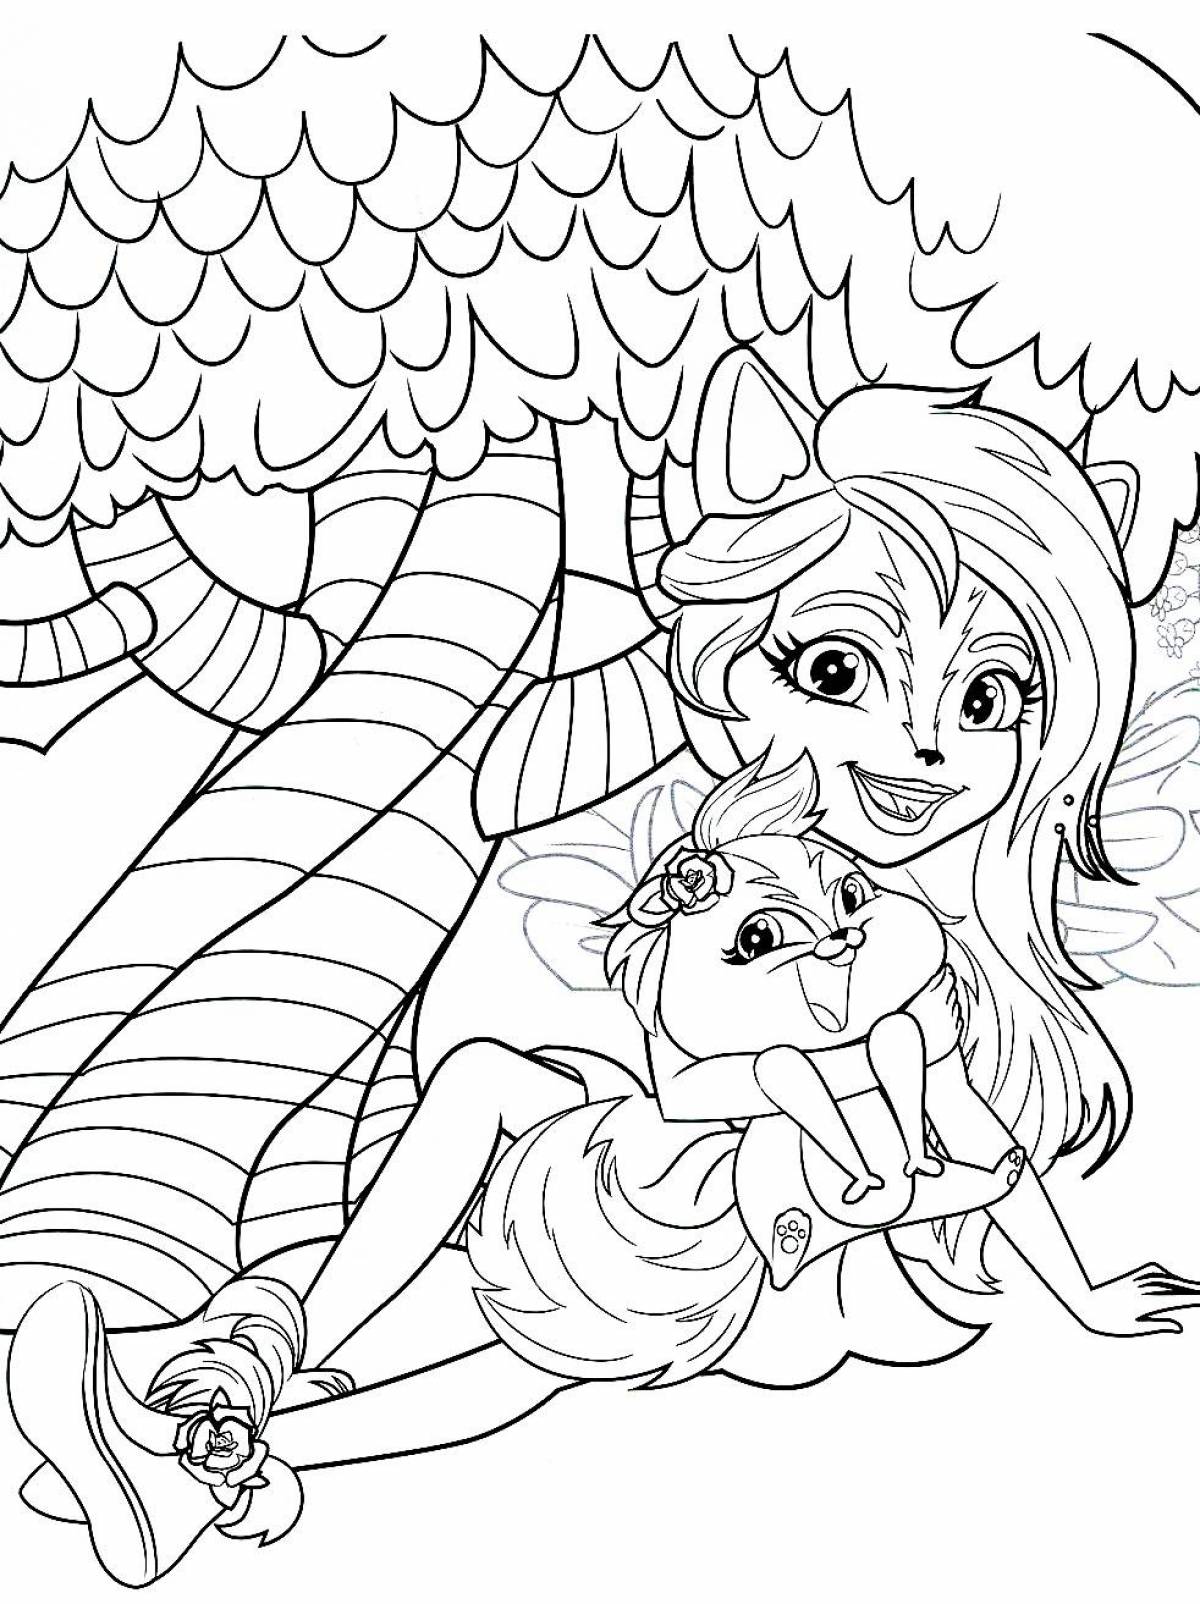 Enchantimals coloring pages for kids